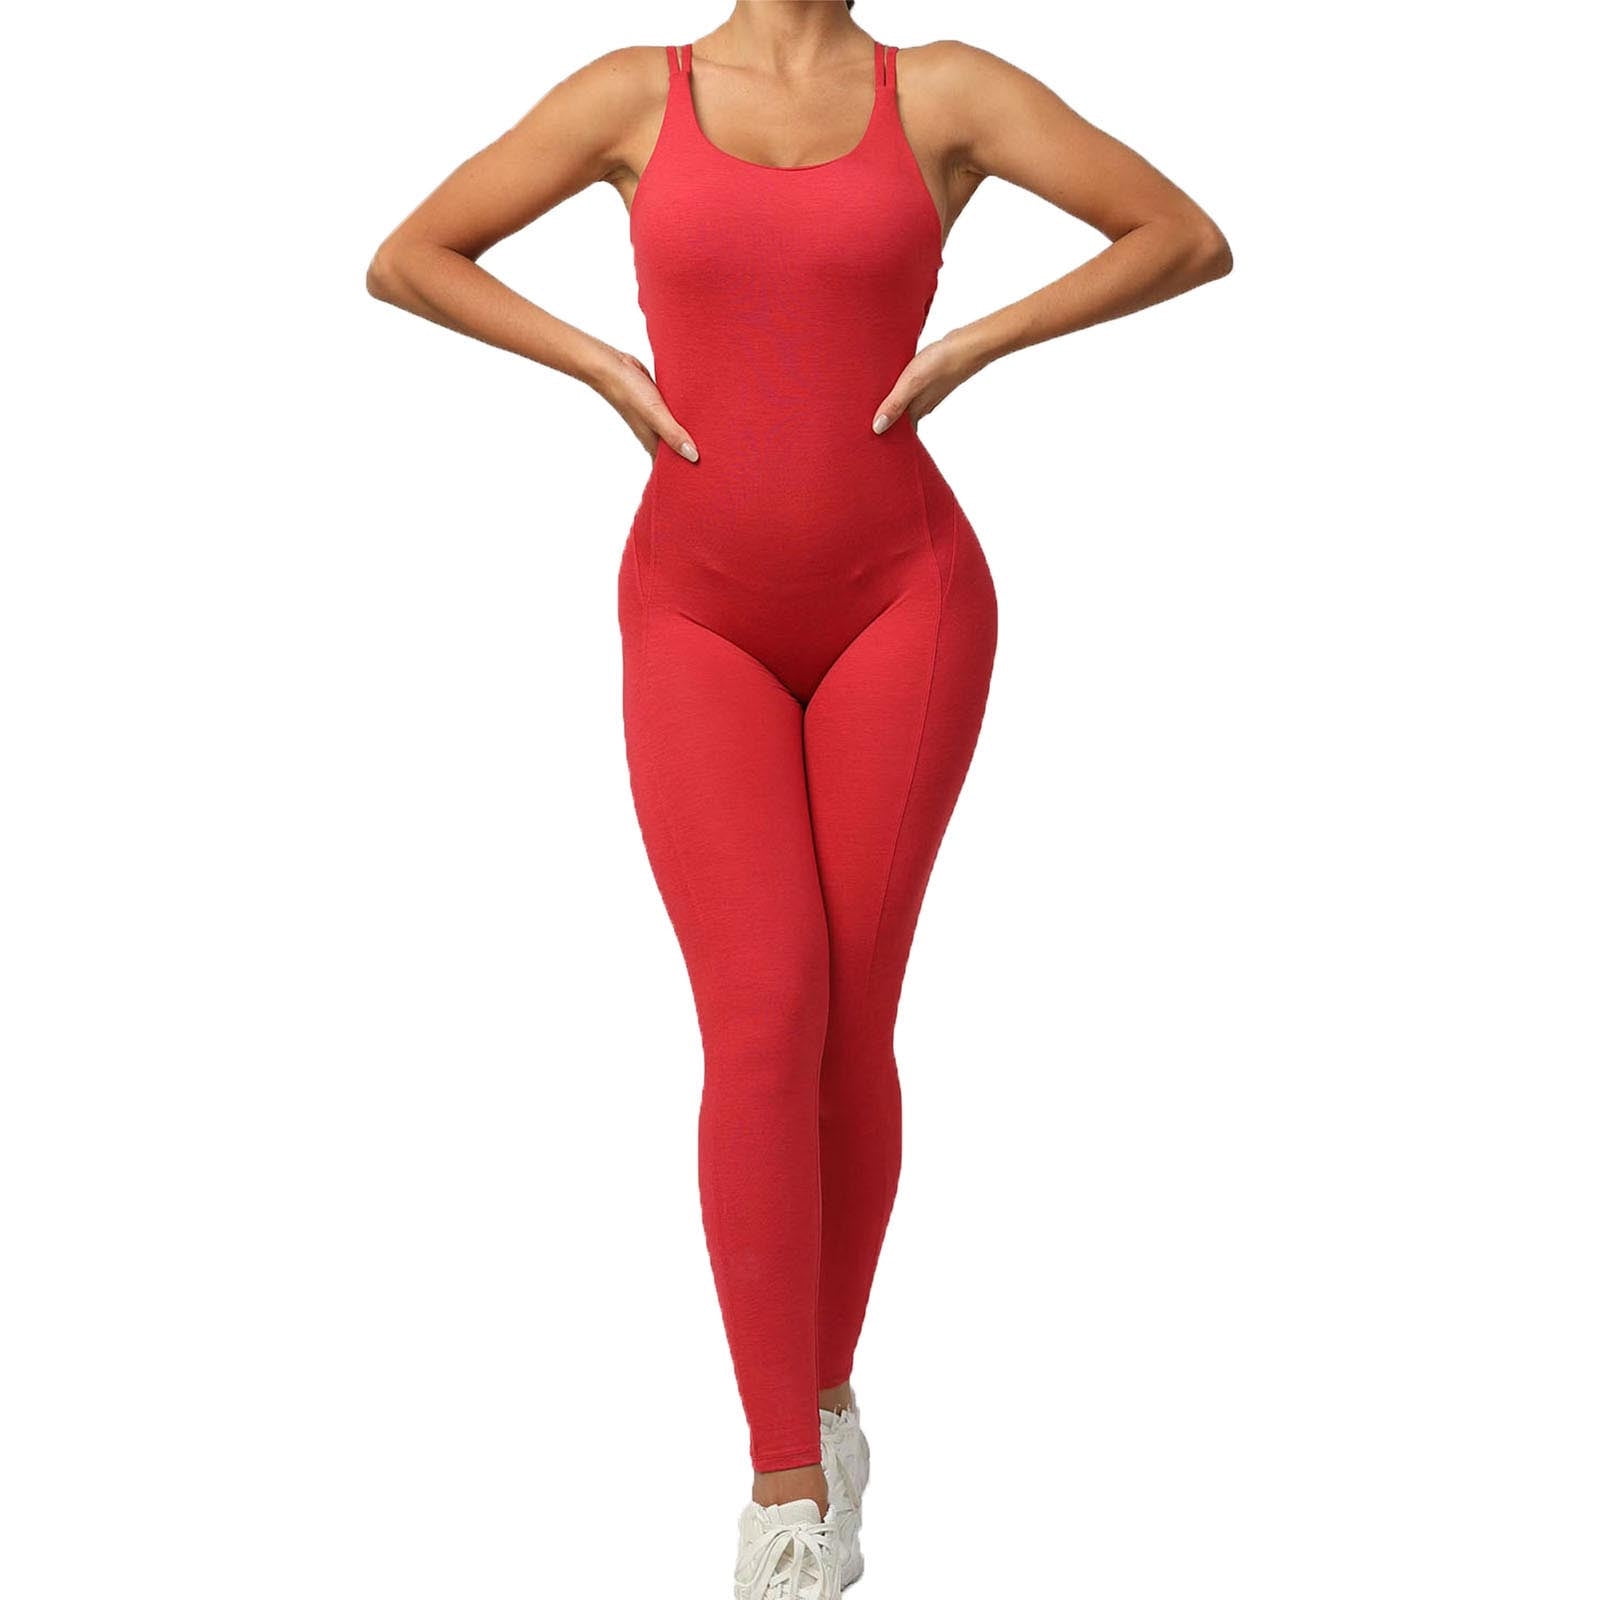 Penkiiy Yoga Pants Women's One-piece Sport Yoga Jumpsuit Running Fitness  Workout Tight Pants Red Yoga Leggings for Women 